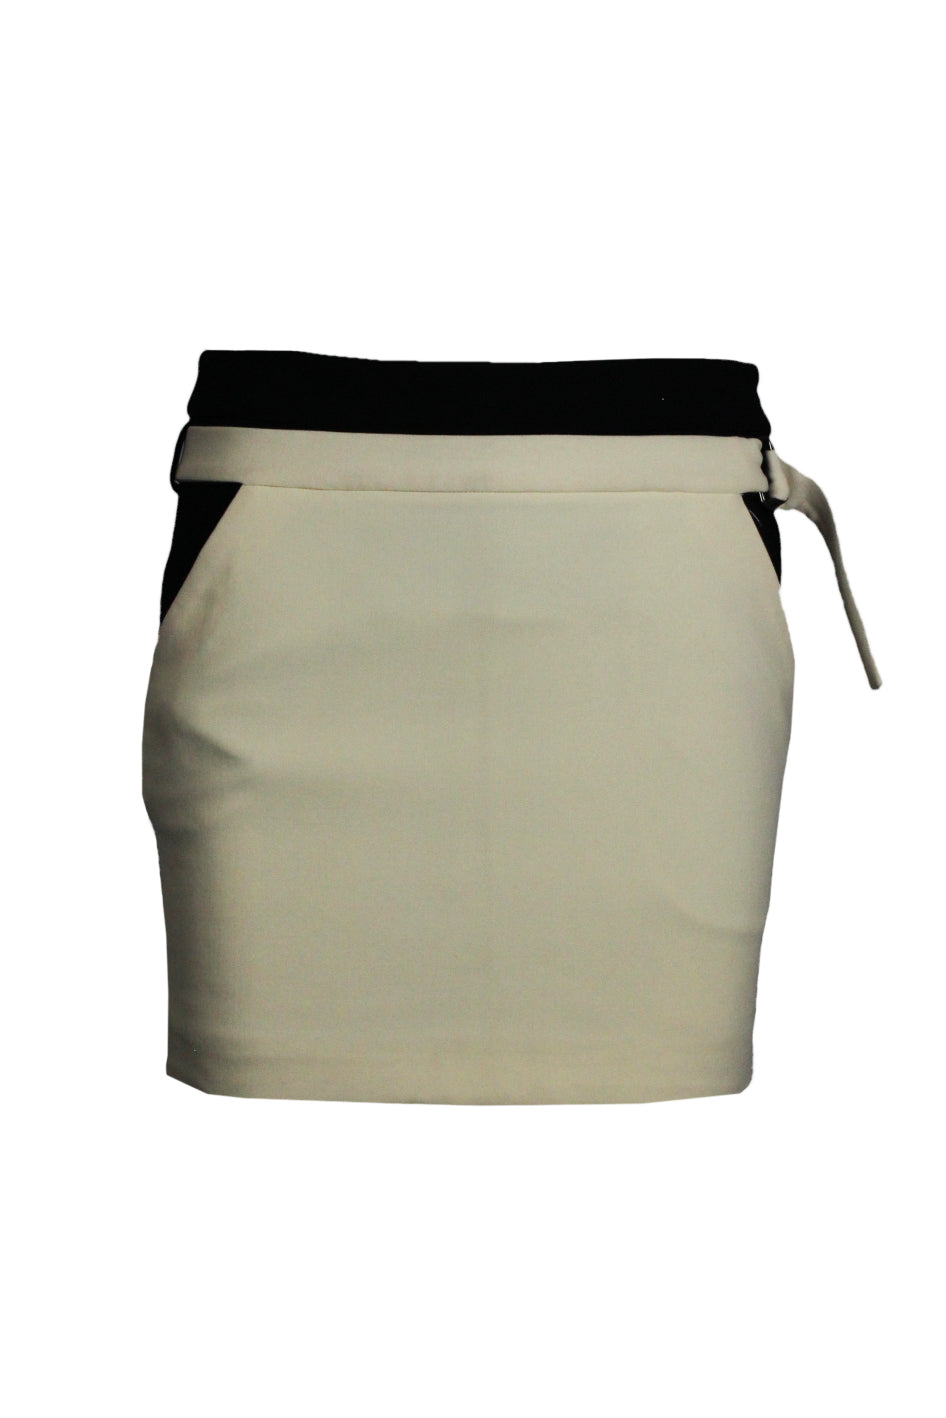 proenza schouler black and cream mini skirt. features cream skirt panel with belt design detail. includes pockets and side zipper